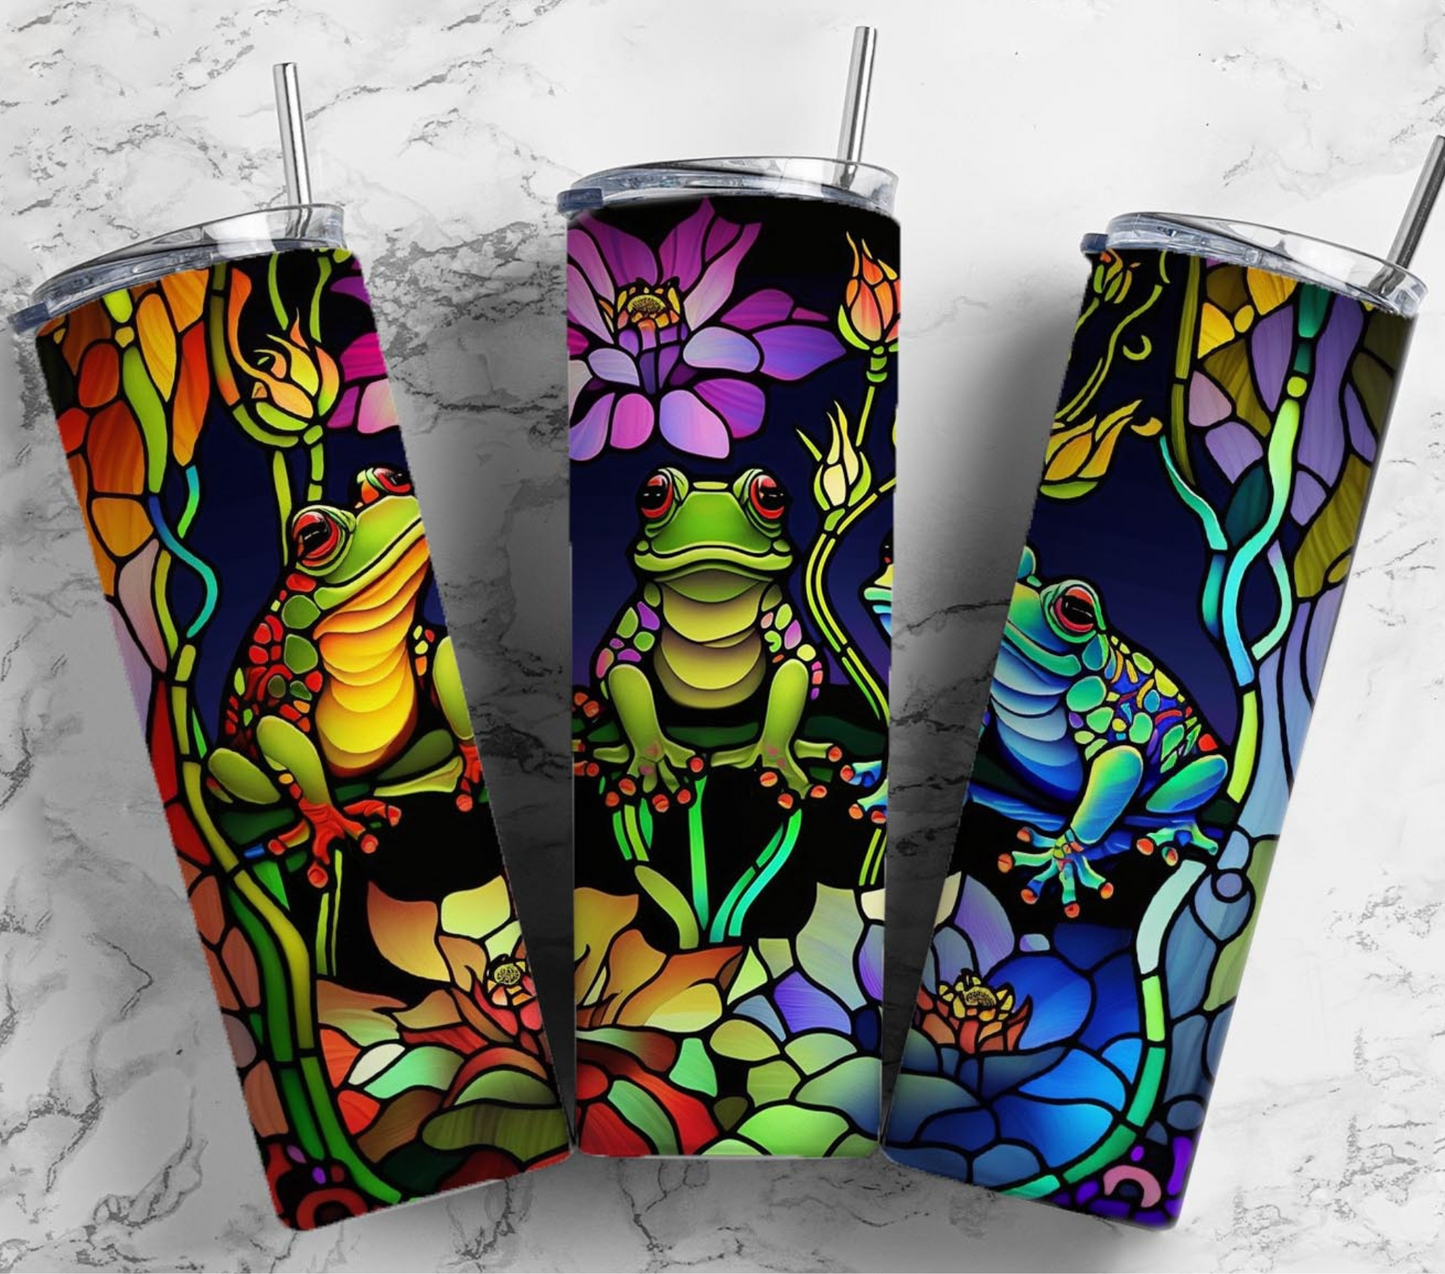 Stained Glass Adhesive Vinyl Wraps - 30 Design Options